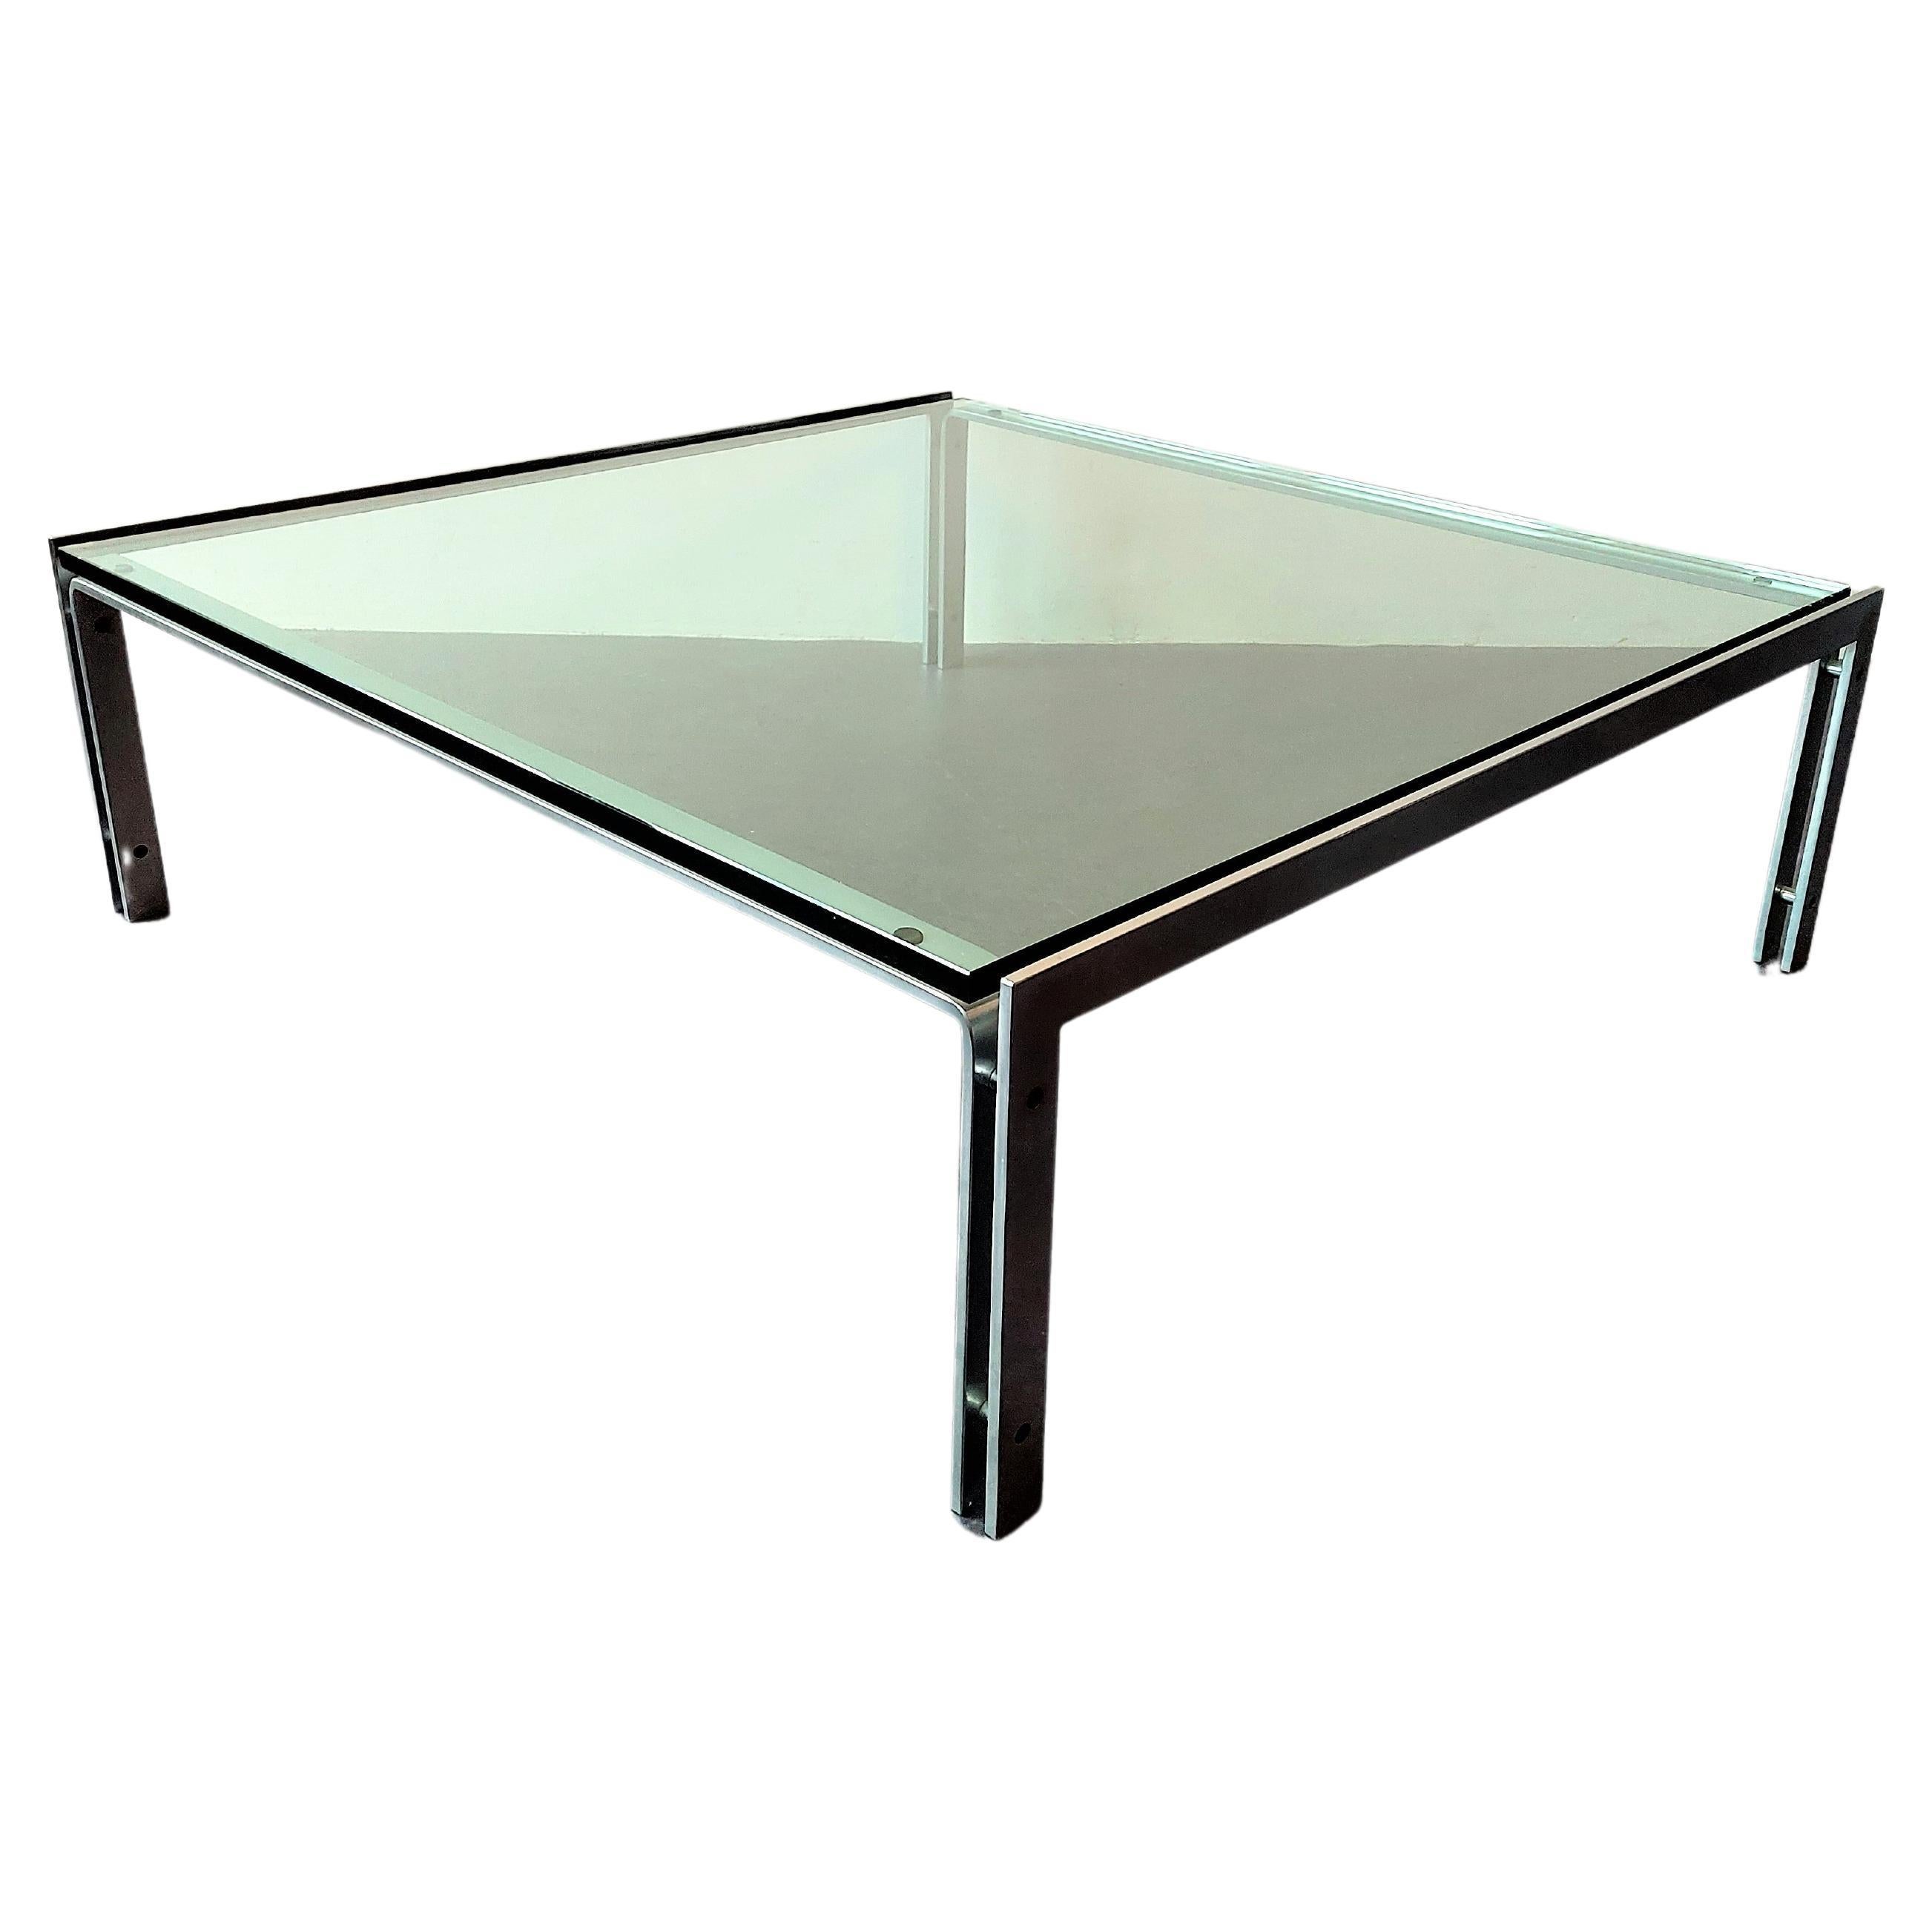 Large Steel and Glass M1 Coffee Table by Hank Kwint for Metaform, 1980's For Sale